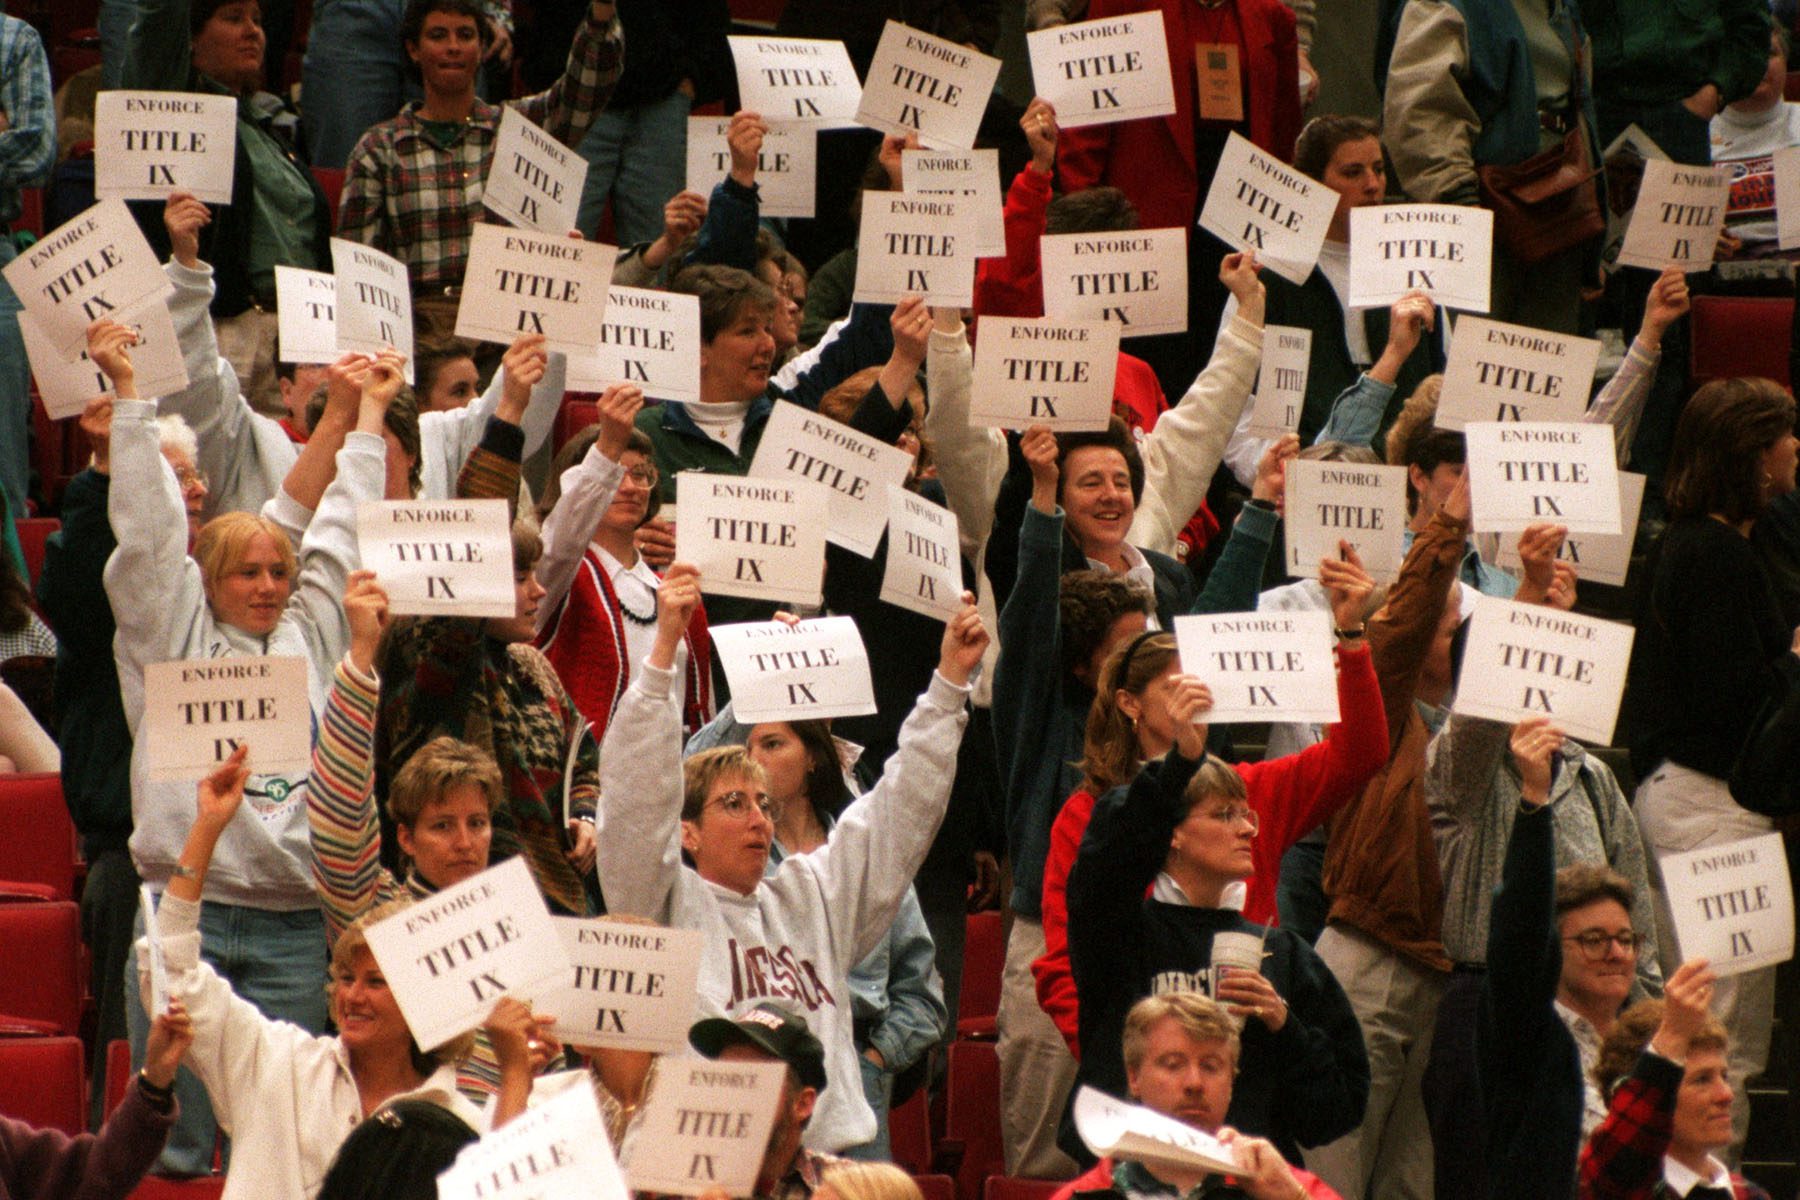 Members and supporters of the Women's Basketball Coaches Association demonstrate in support of Title IX by holding up printed signs that read "Enforce Title IX"